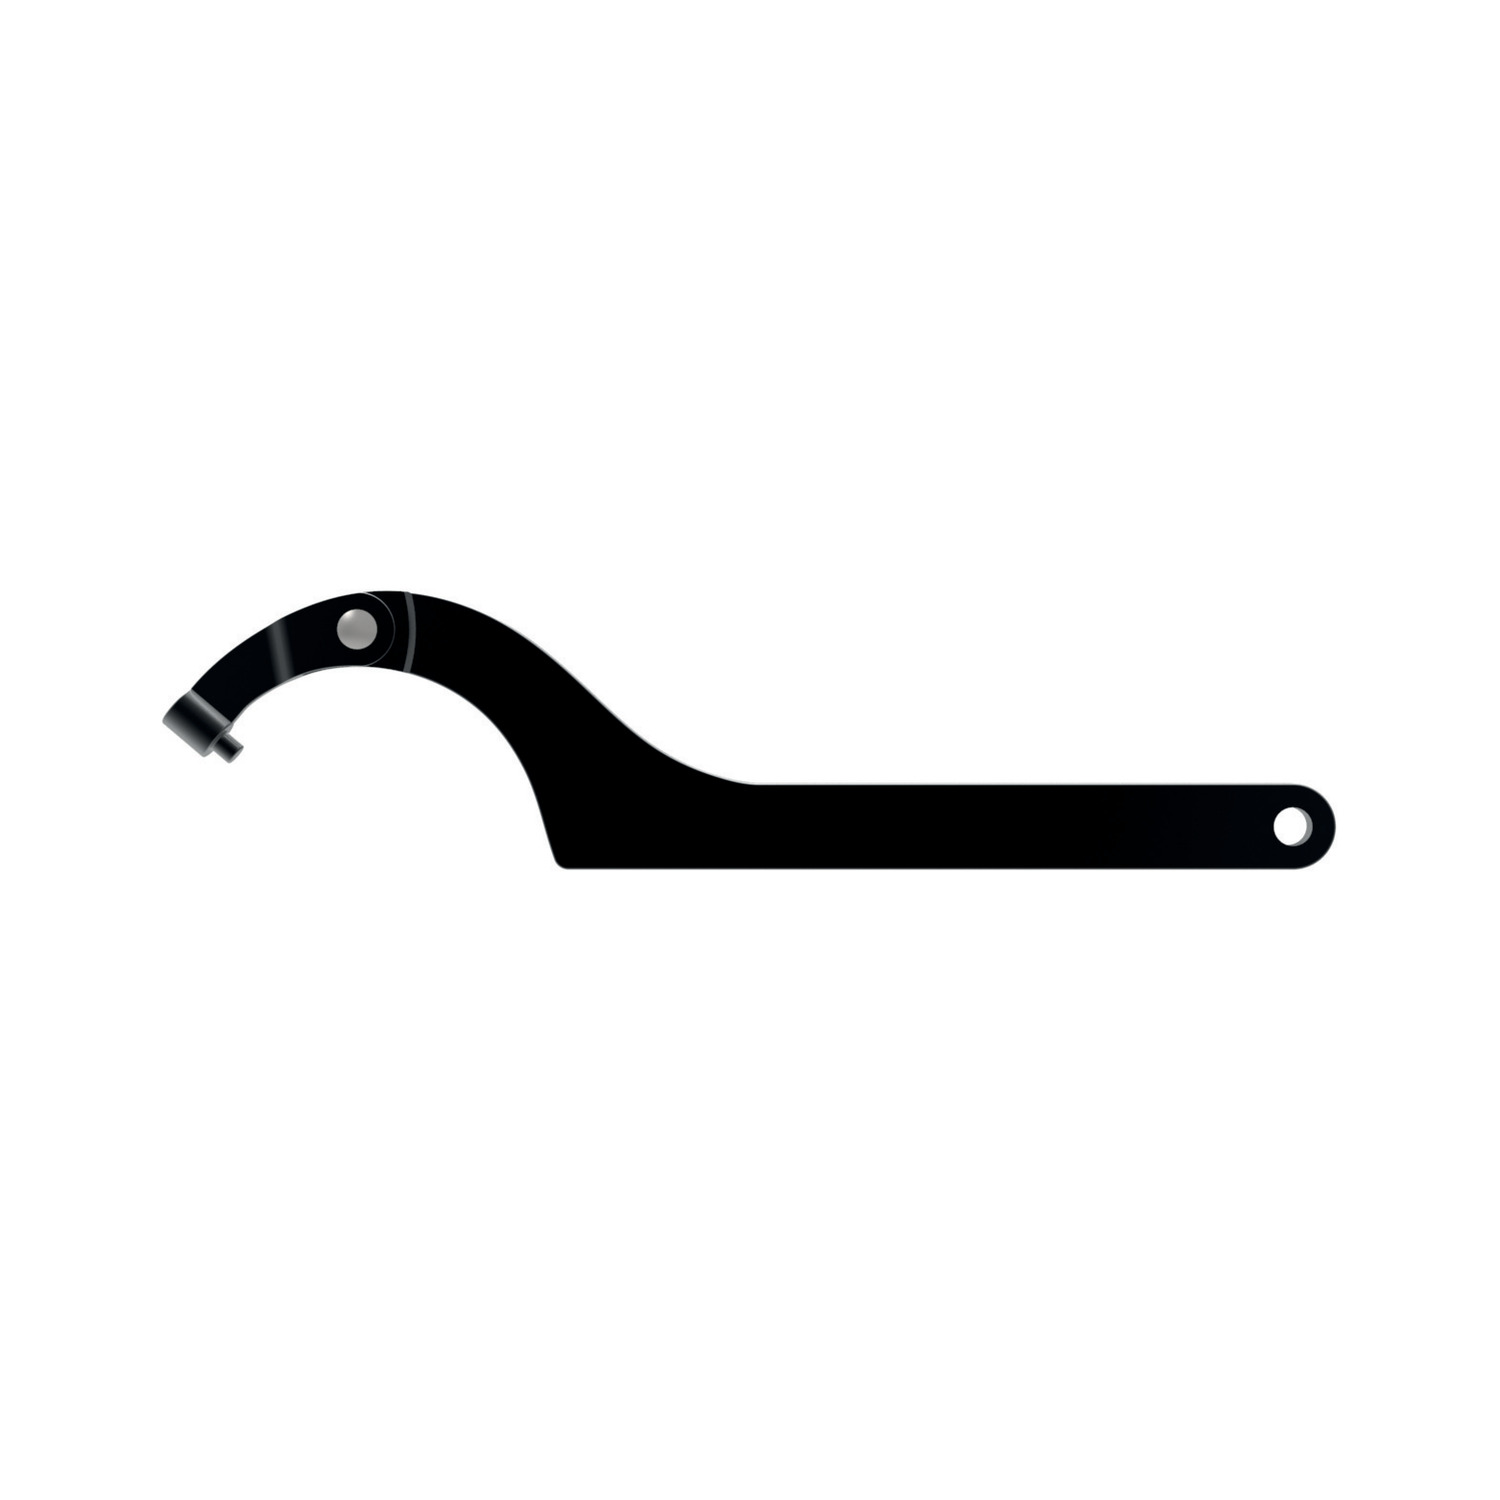 Product 95151, Hook Spanners - with Pin Nose hinge type / 